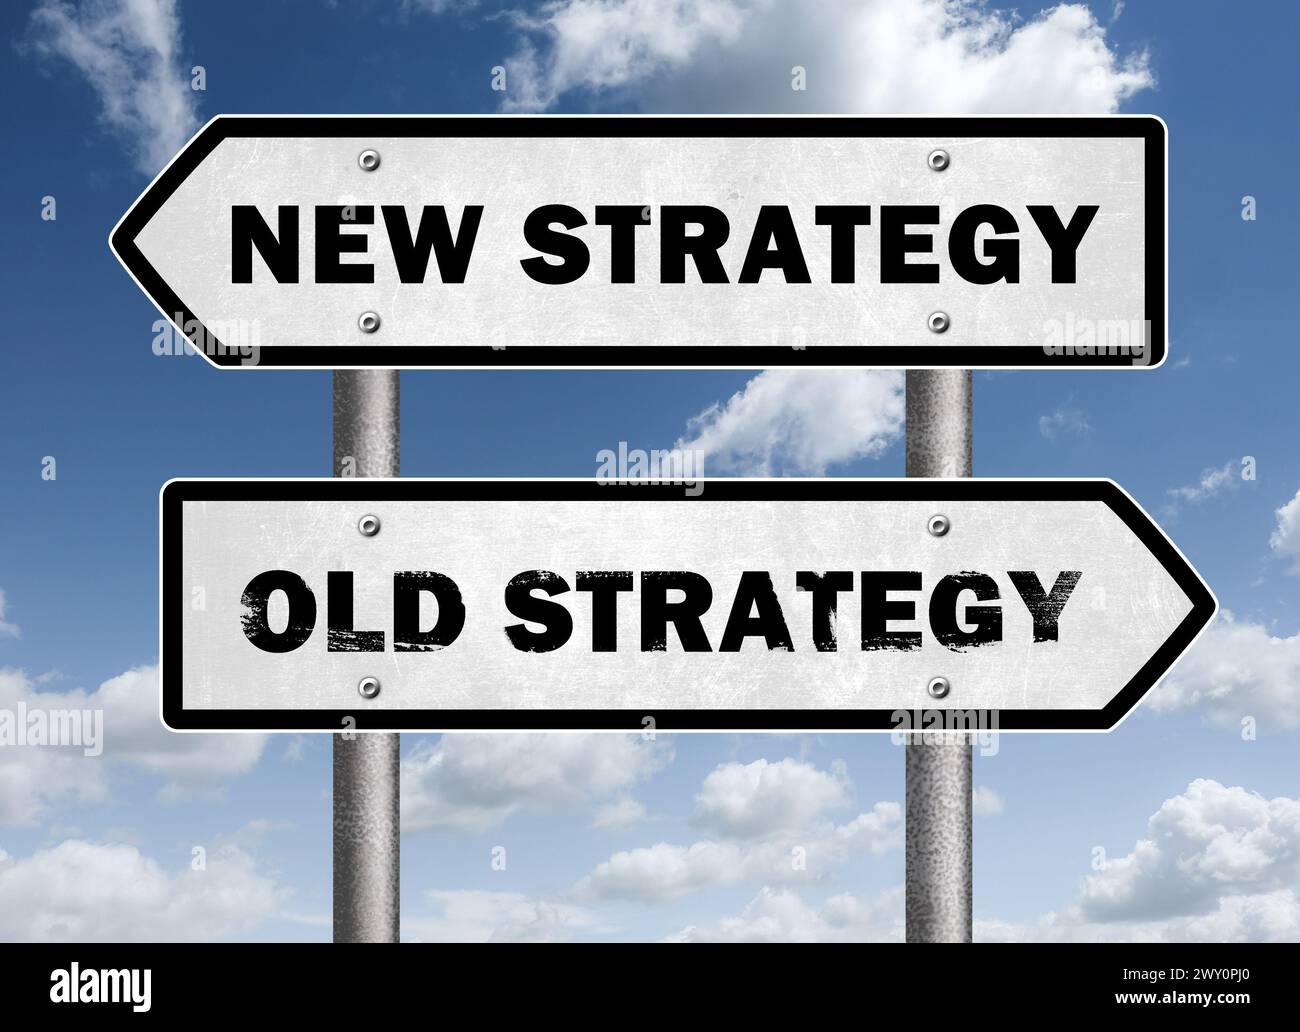 New Strategy versus Old Strategy Stock Photo